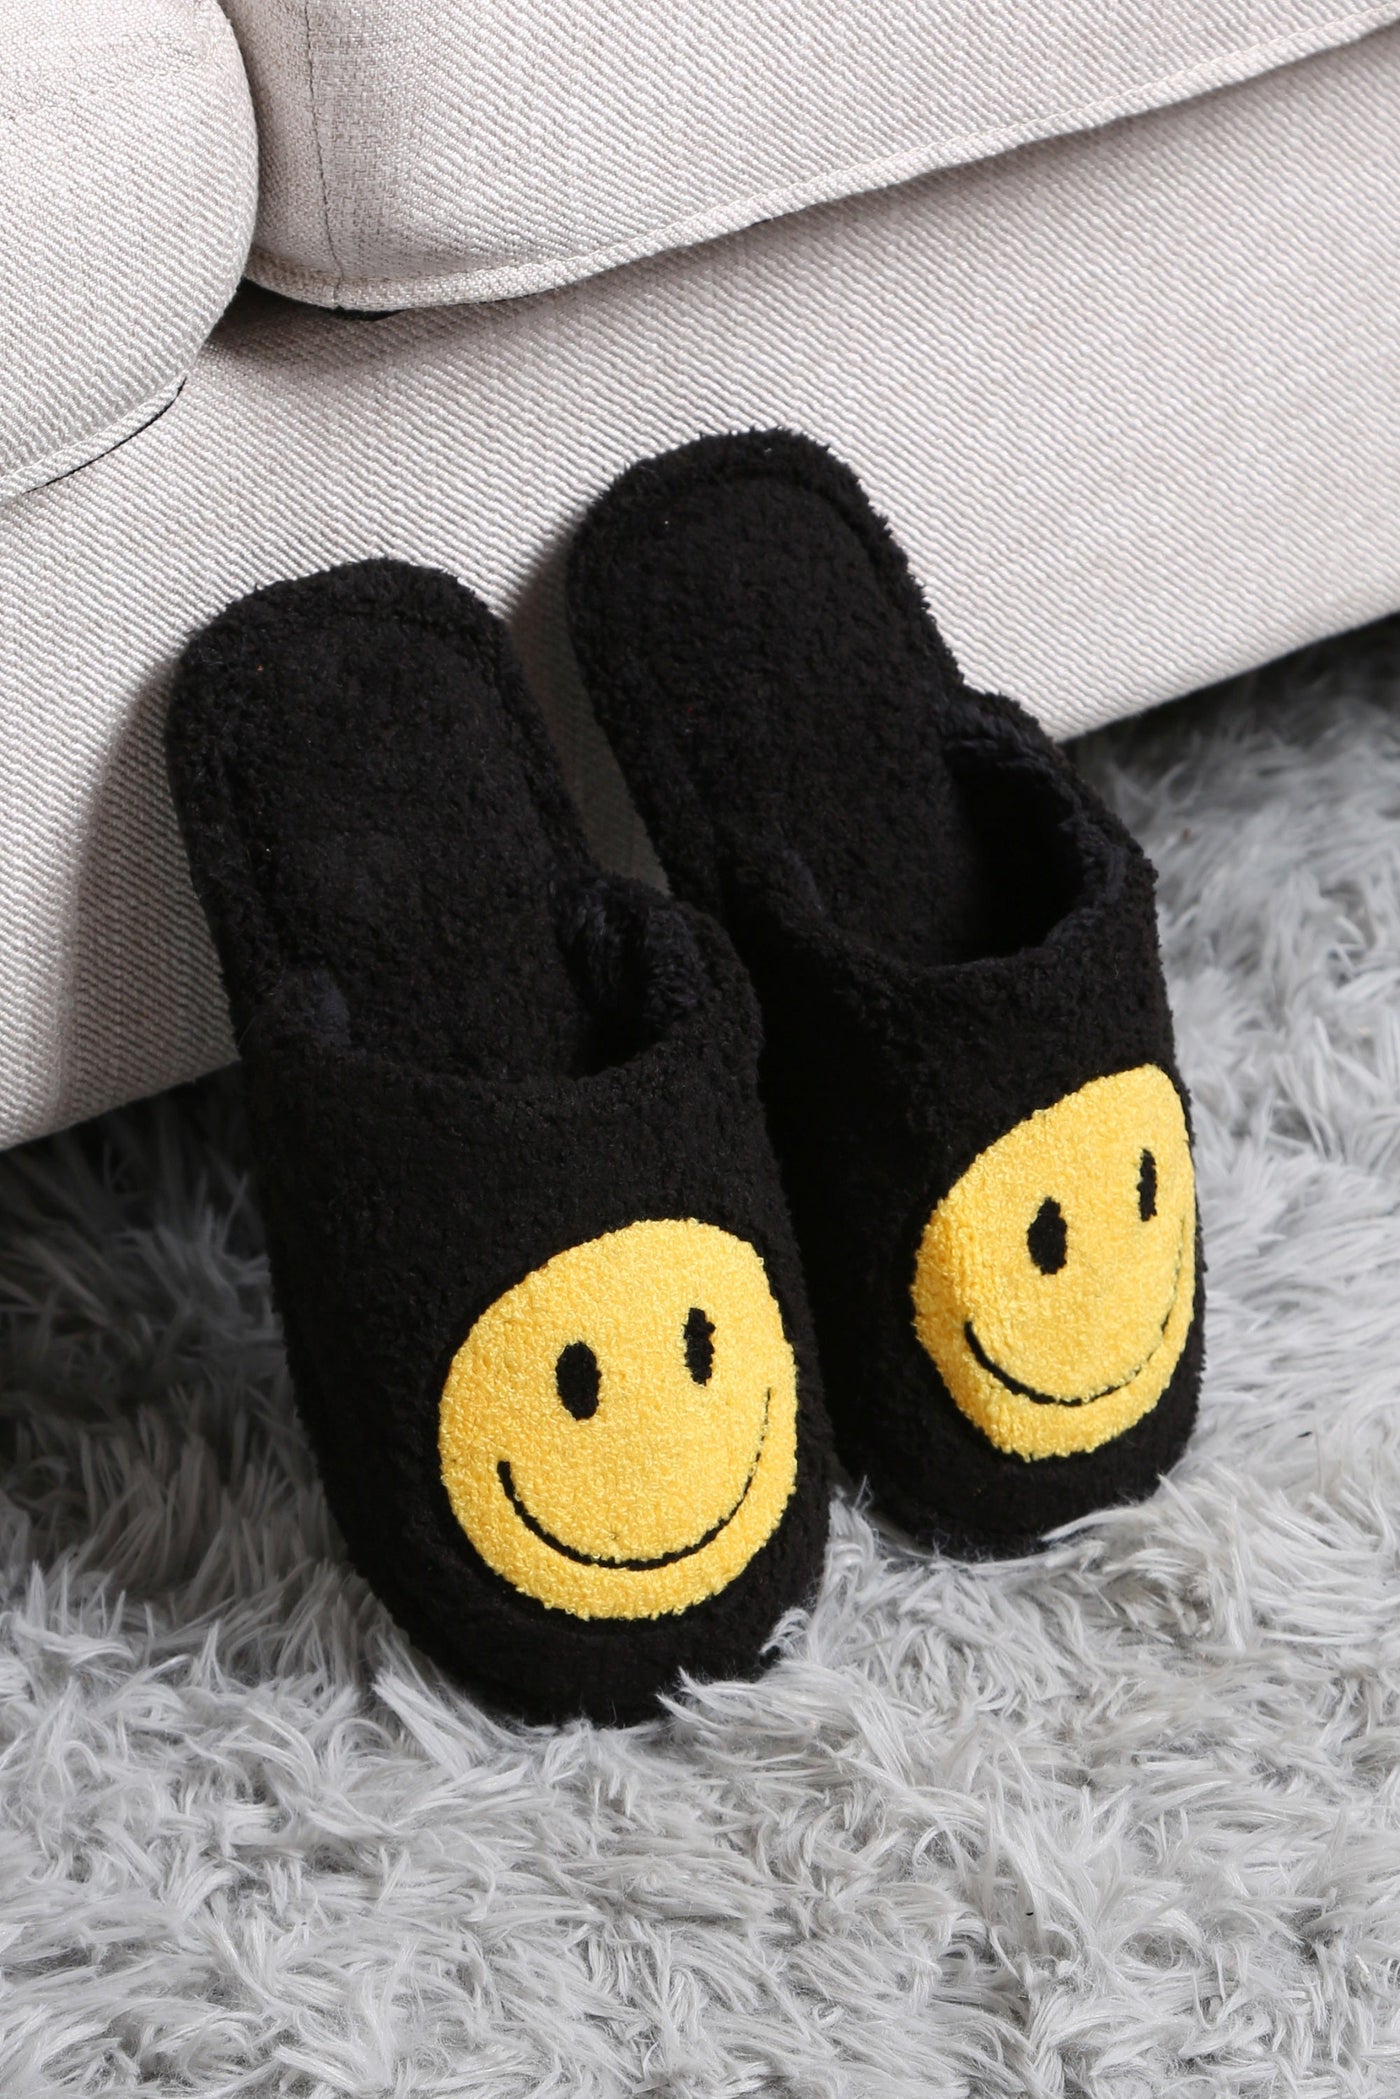 JCL2125 Super Lux Smiley Face Slippers